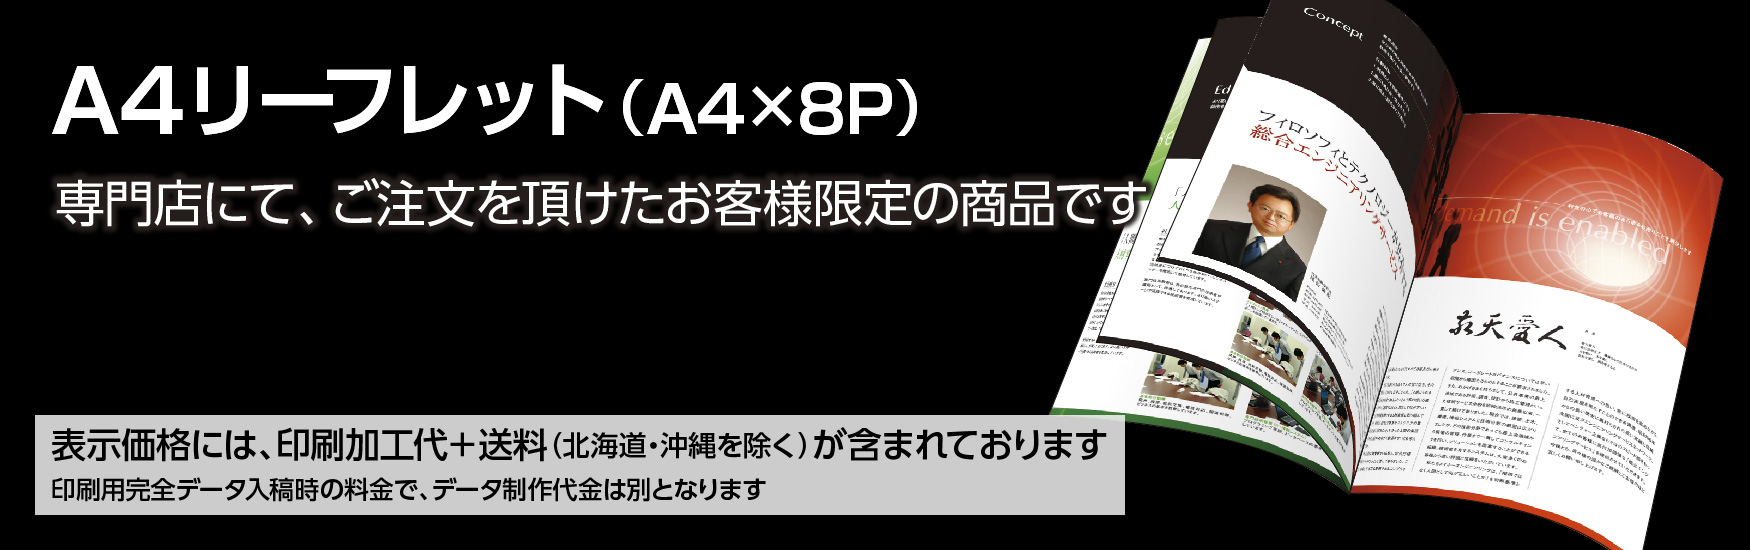 A4×8Pオフセット印刷